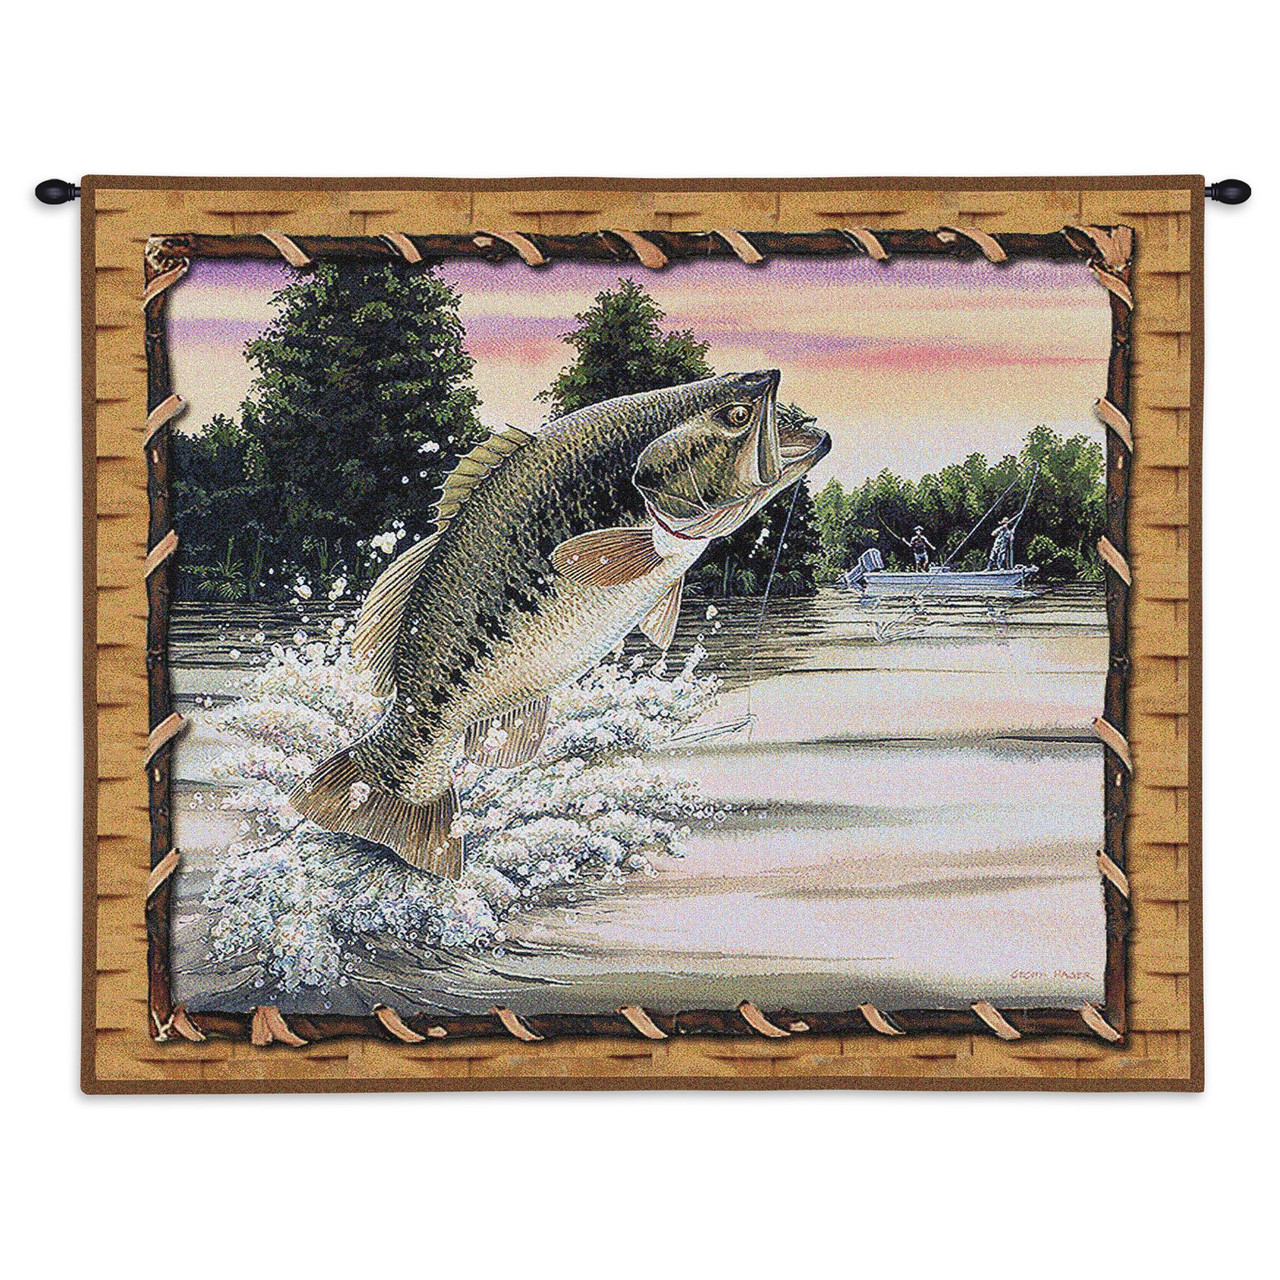 Bass Attack | Woven Tapestry Wall Art Hanging | Bass Outdoorsman Fishing  Cabin Lodge Decor | Cotton | Made in the USA | Size 32x26